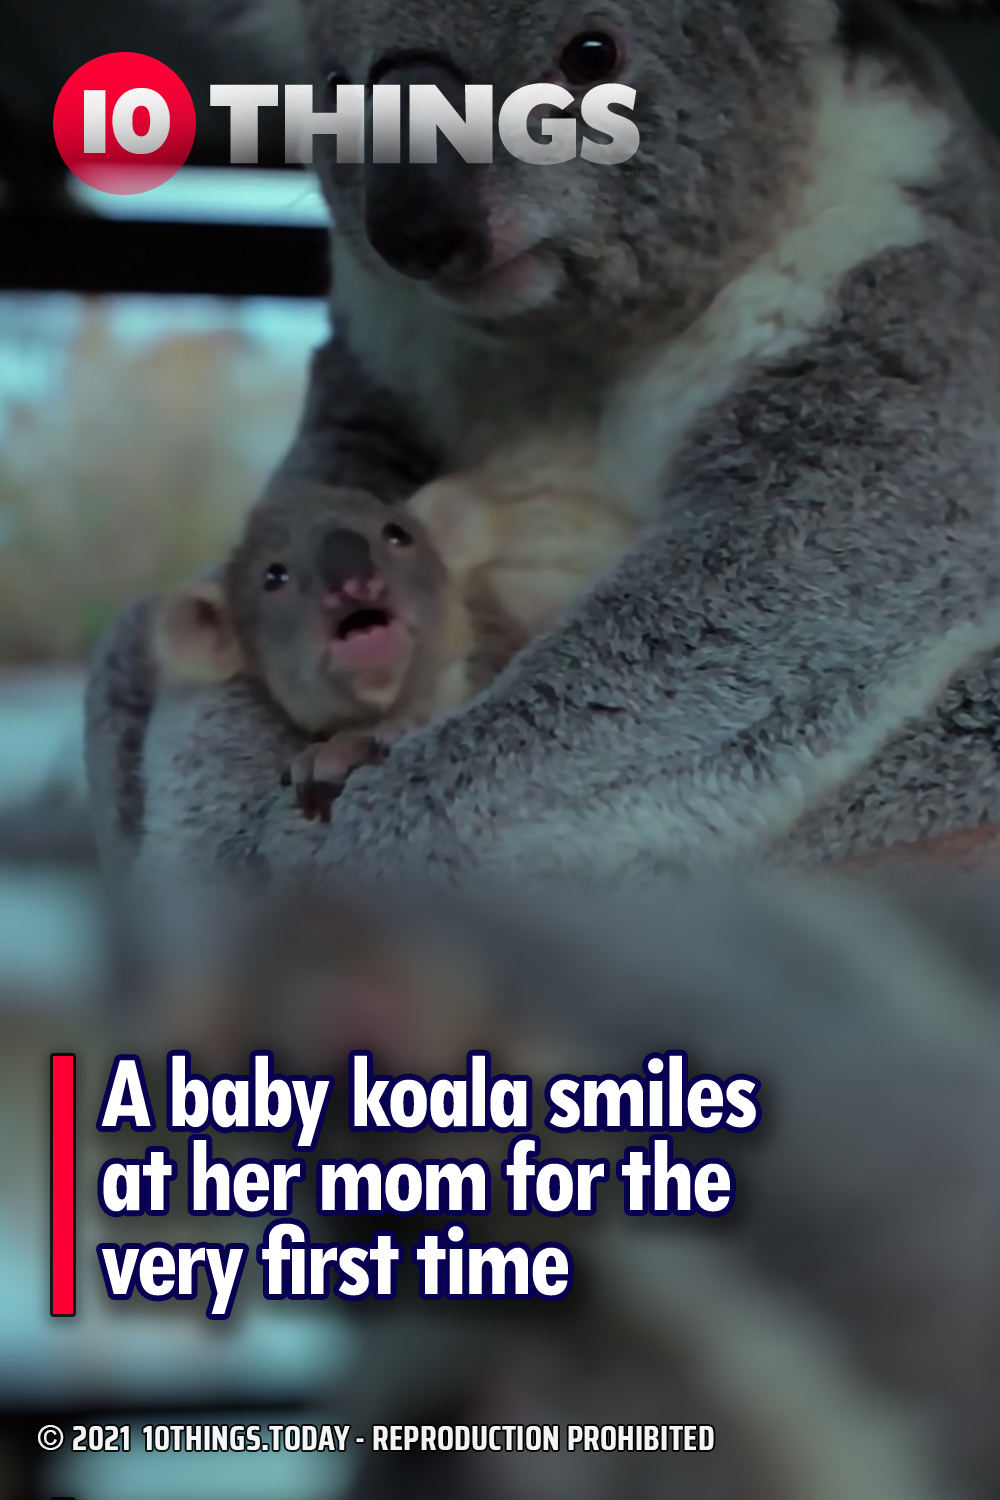 A baby koala smiles at her mom for the very first time